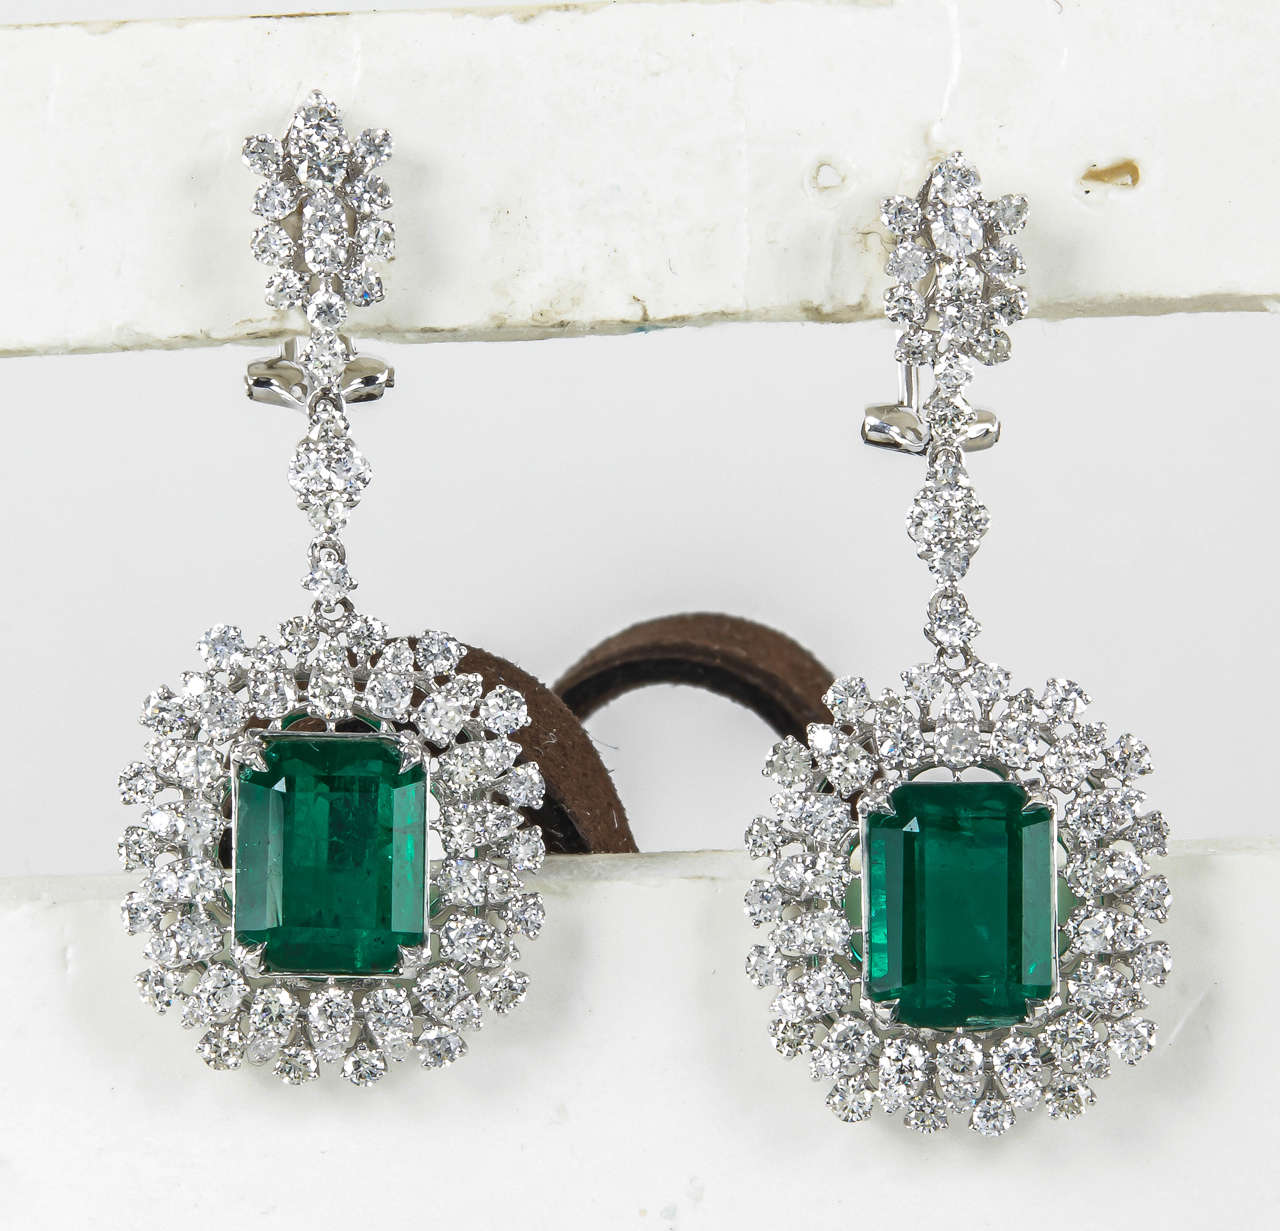 Stunning Emerald and Diamond earrings, a very wearable and classic design!

5.90 carats of green emerald

3.52 carats of diamonds.

18k white gold.